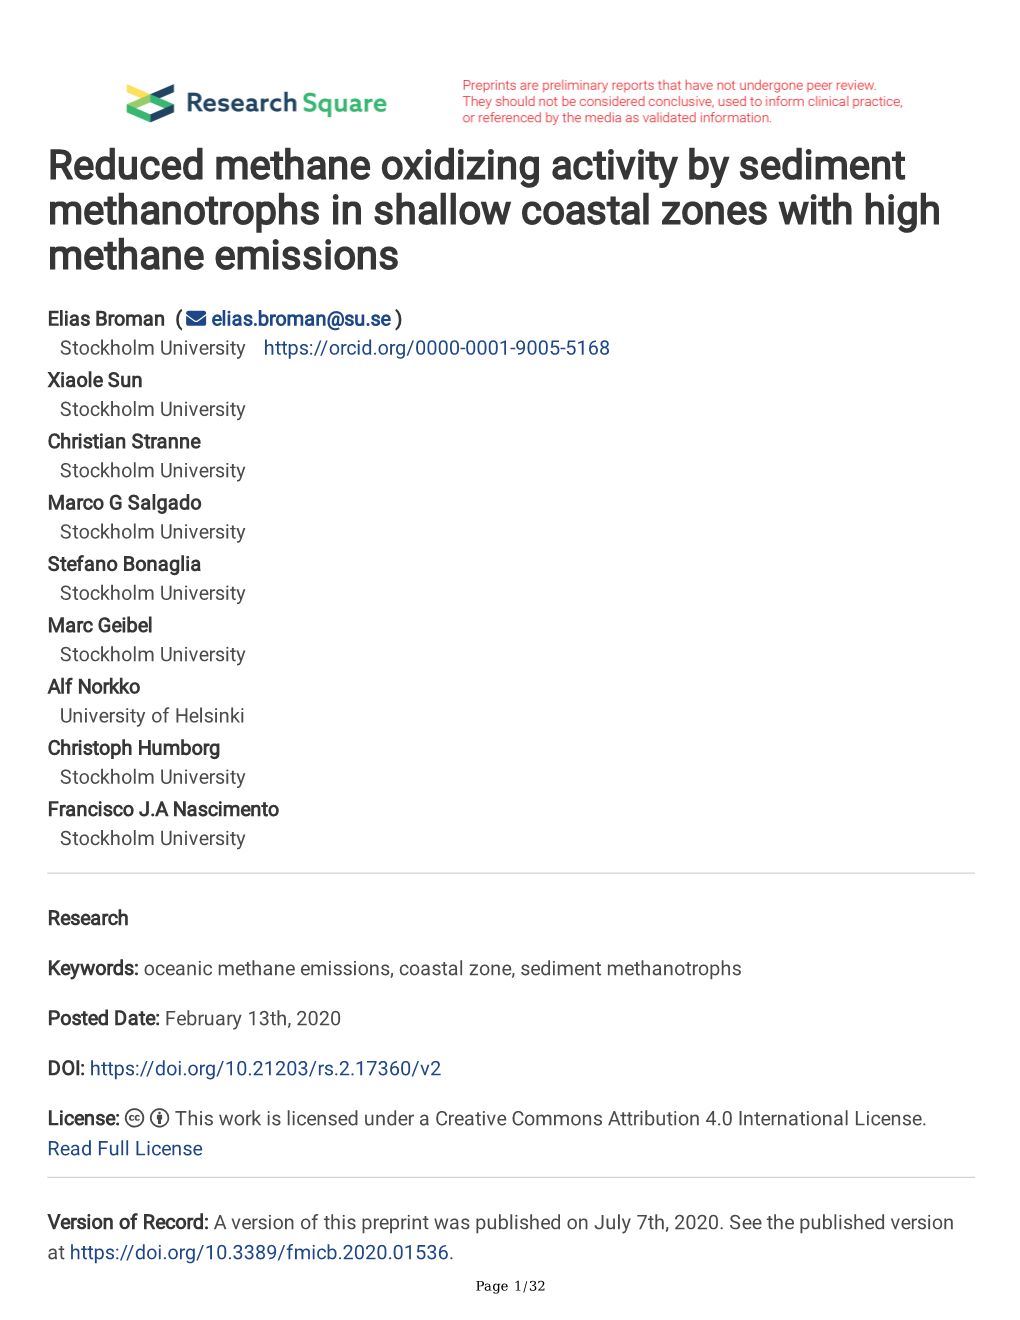 Reduced Methane Oxidizing Activity by Sediment Methanotrophs in Shallow Coastal Zones with High Methane Emissions